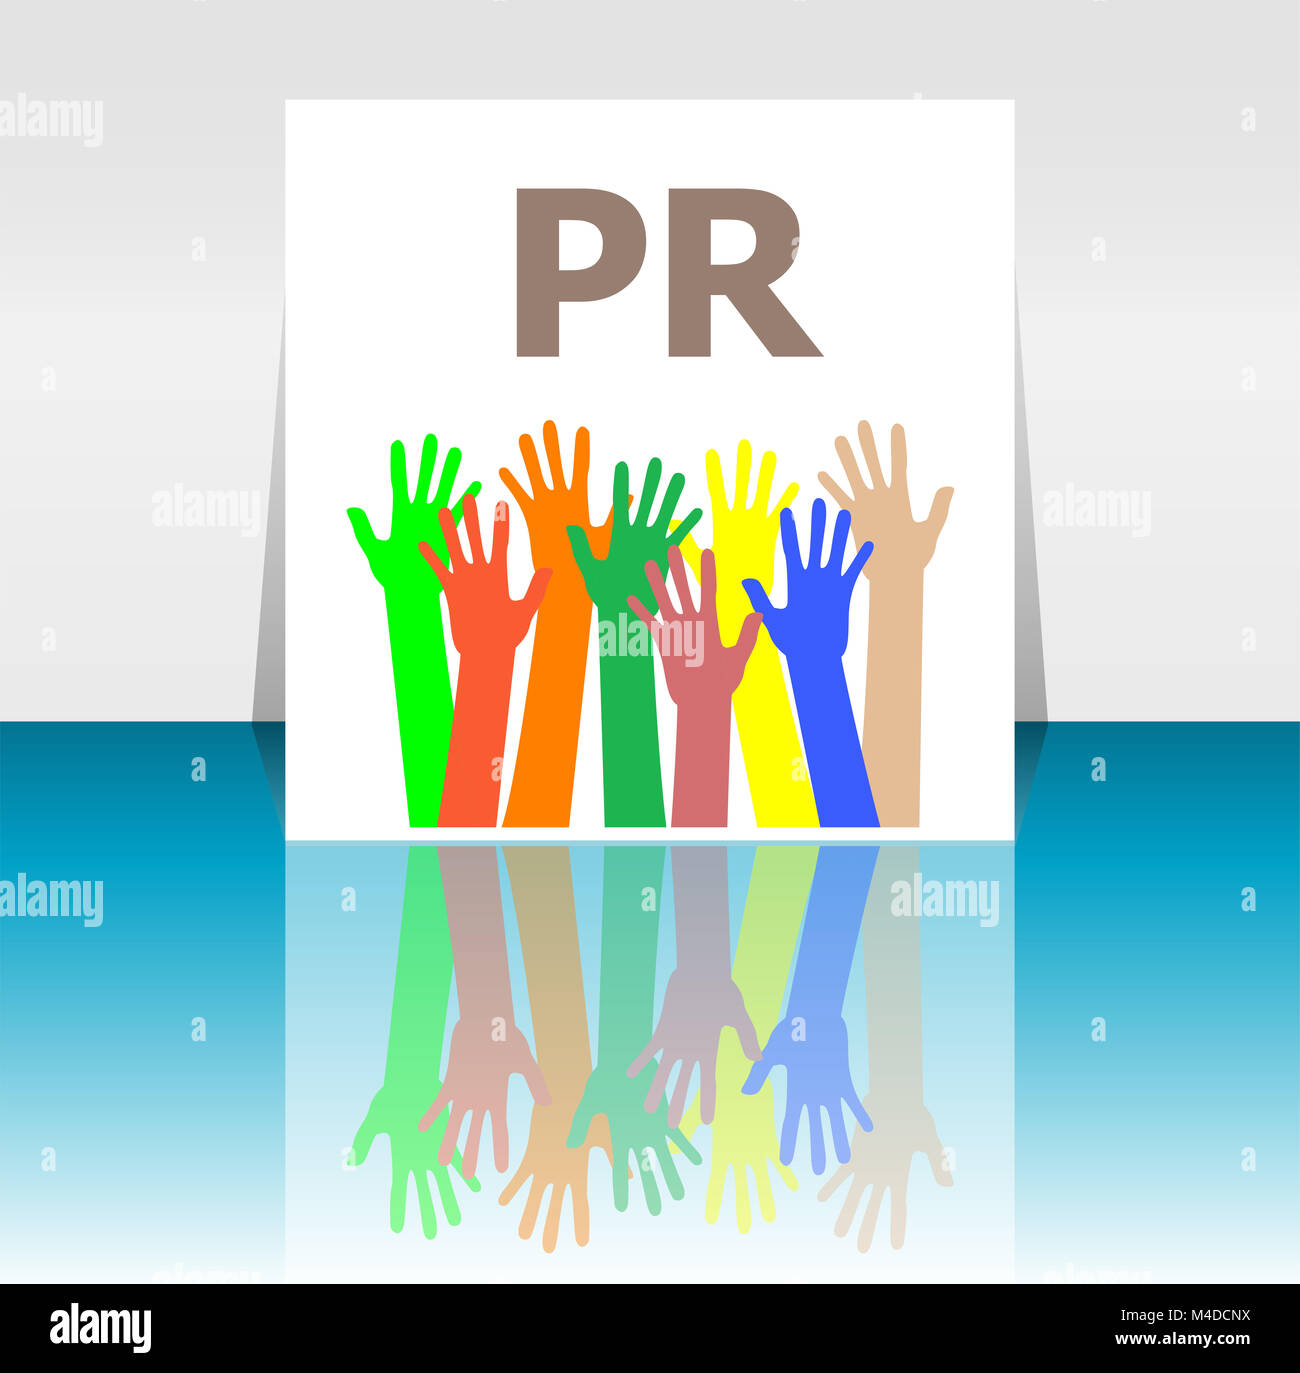 Text Pr. Public Relations. Advertising concept . Human hands silhouettes Stock Photo